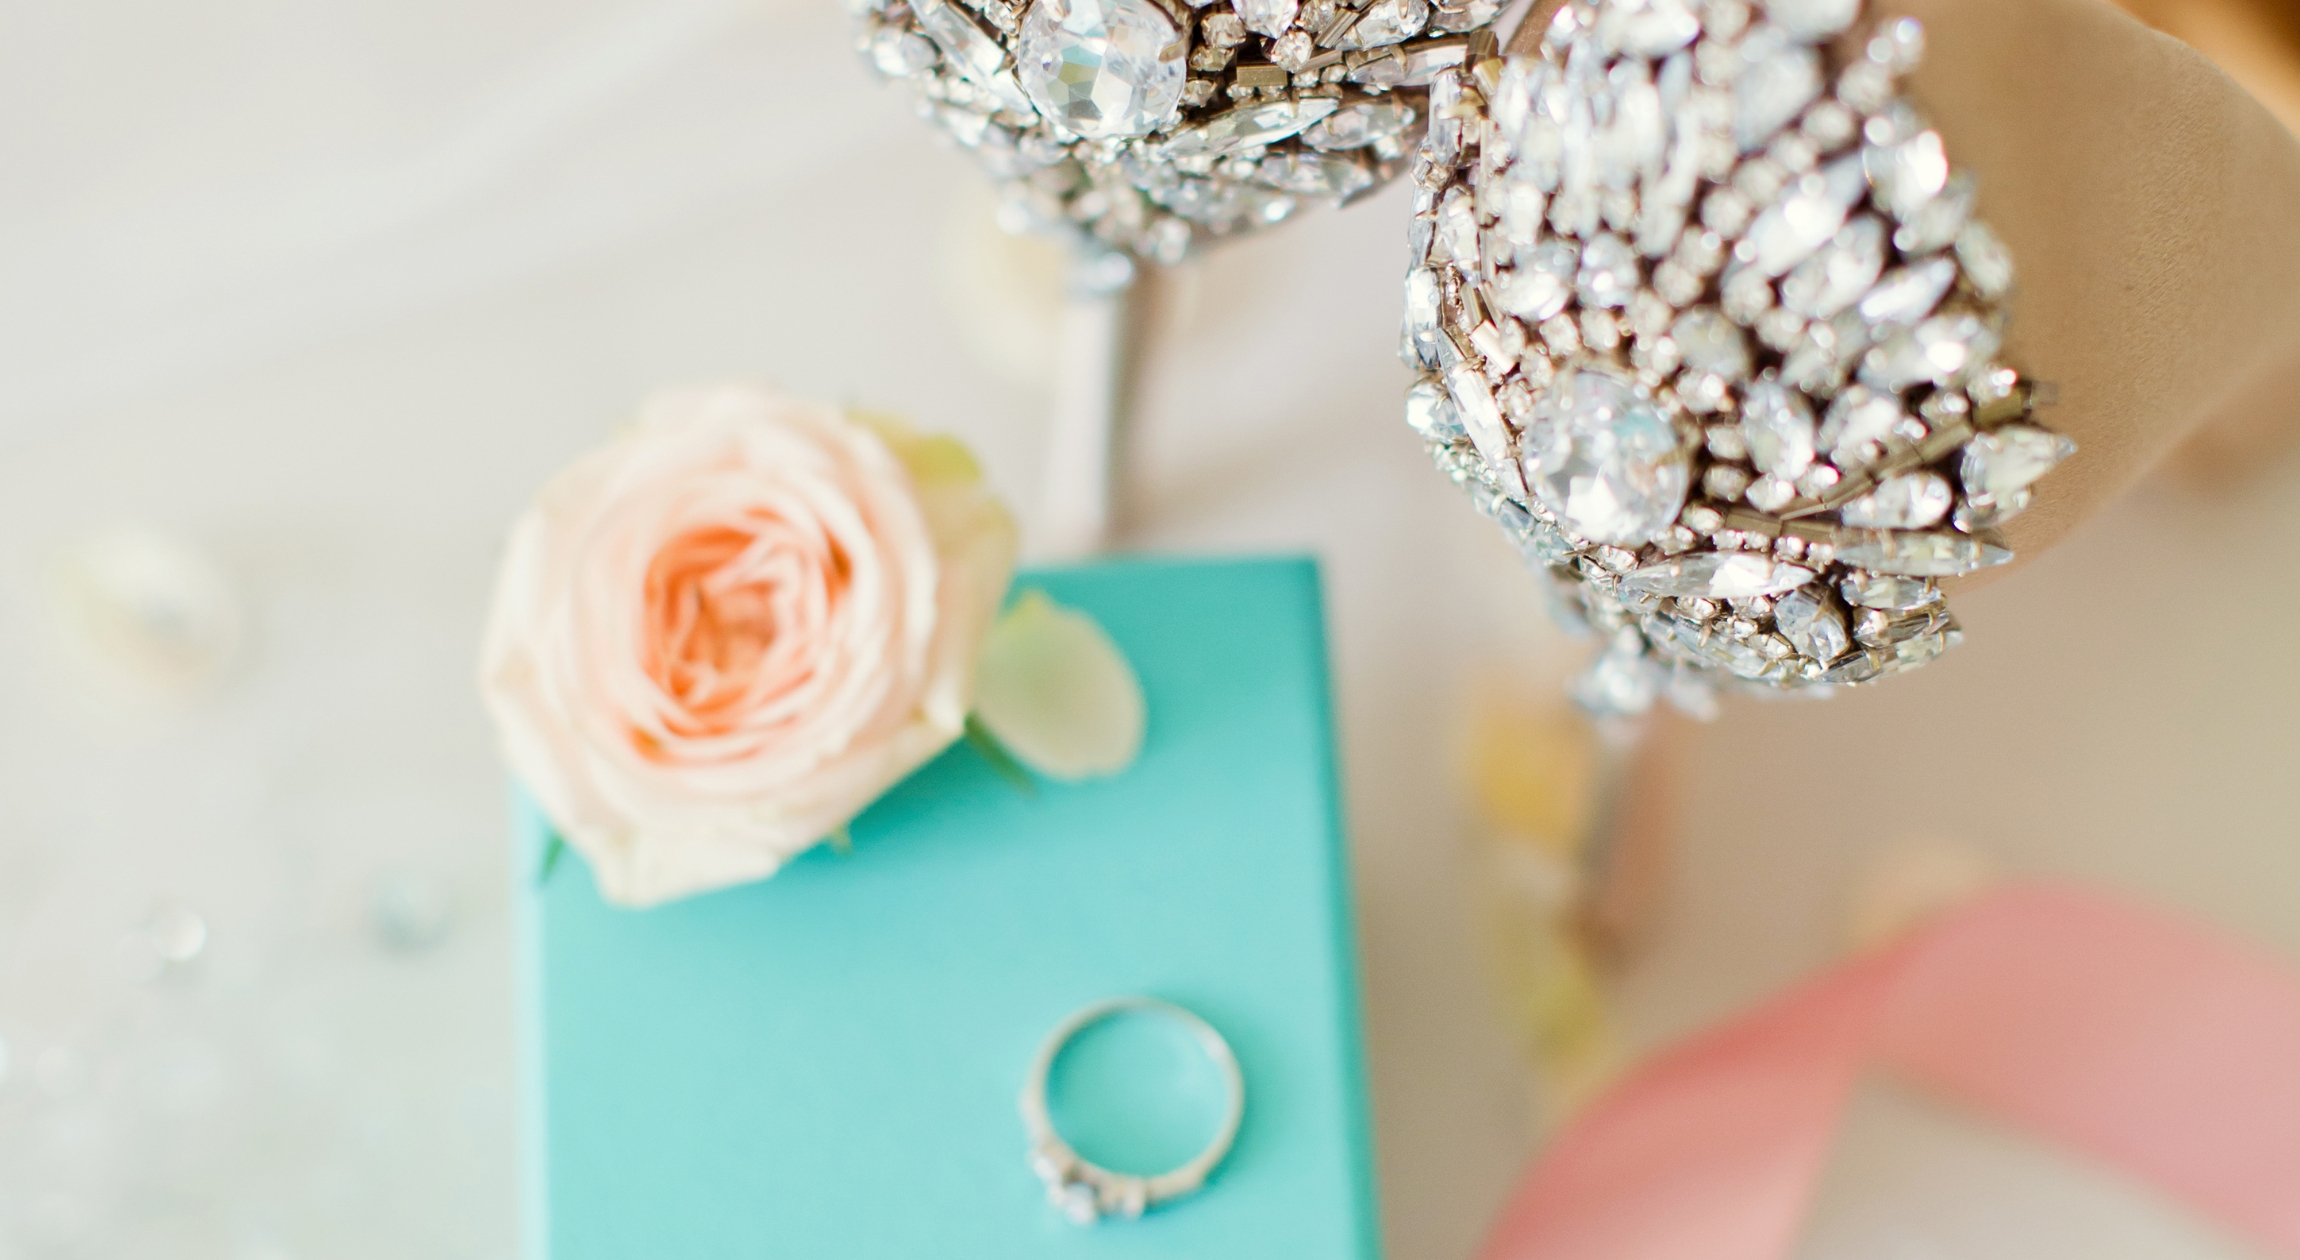 Wedding shoes and an engagement ring on a blue box next to a flower